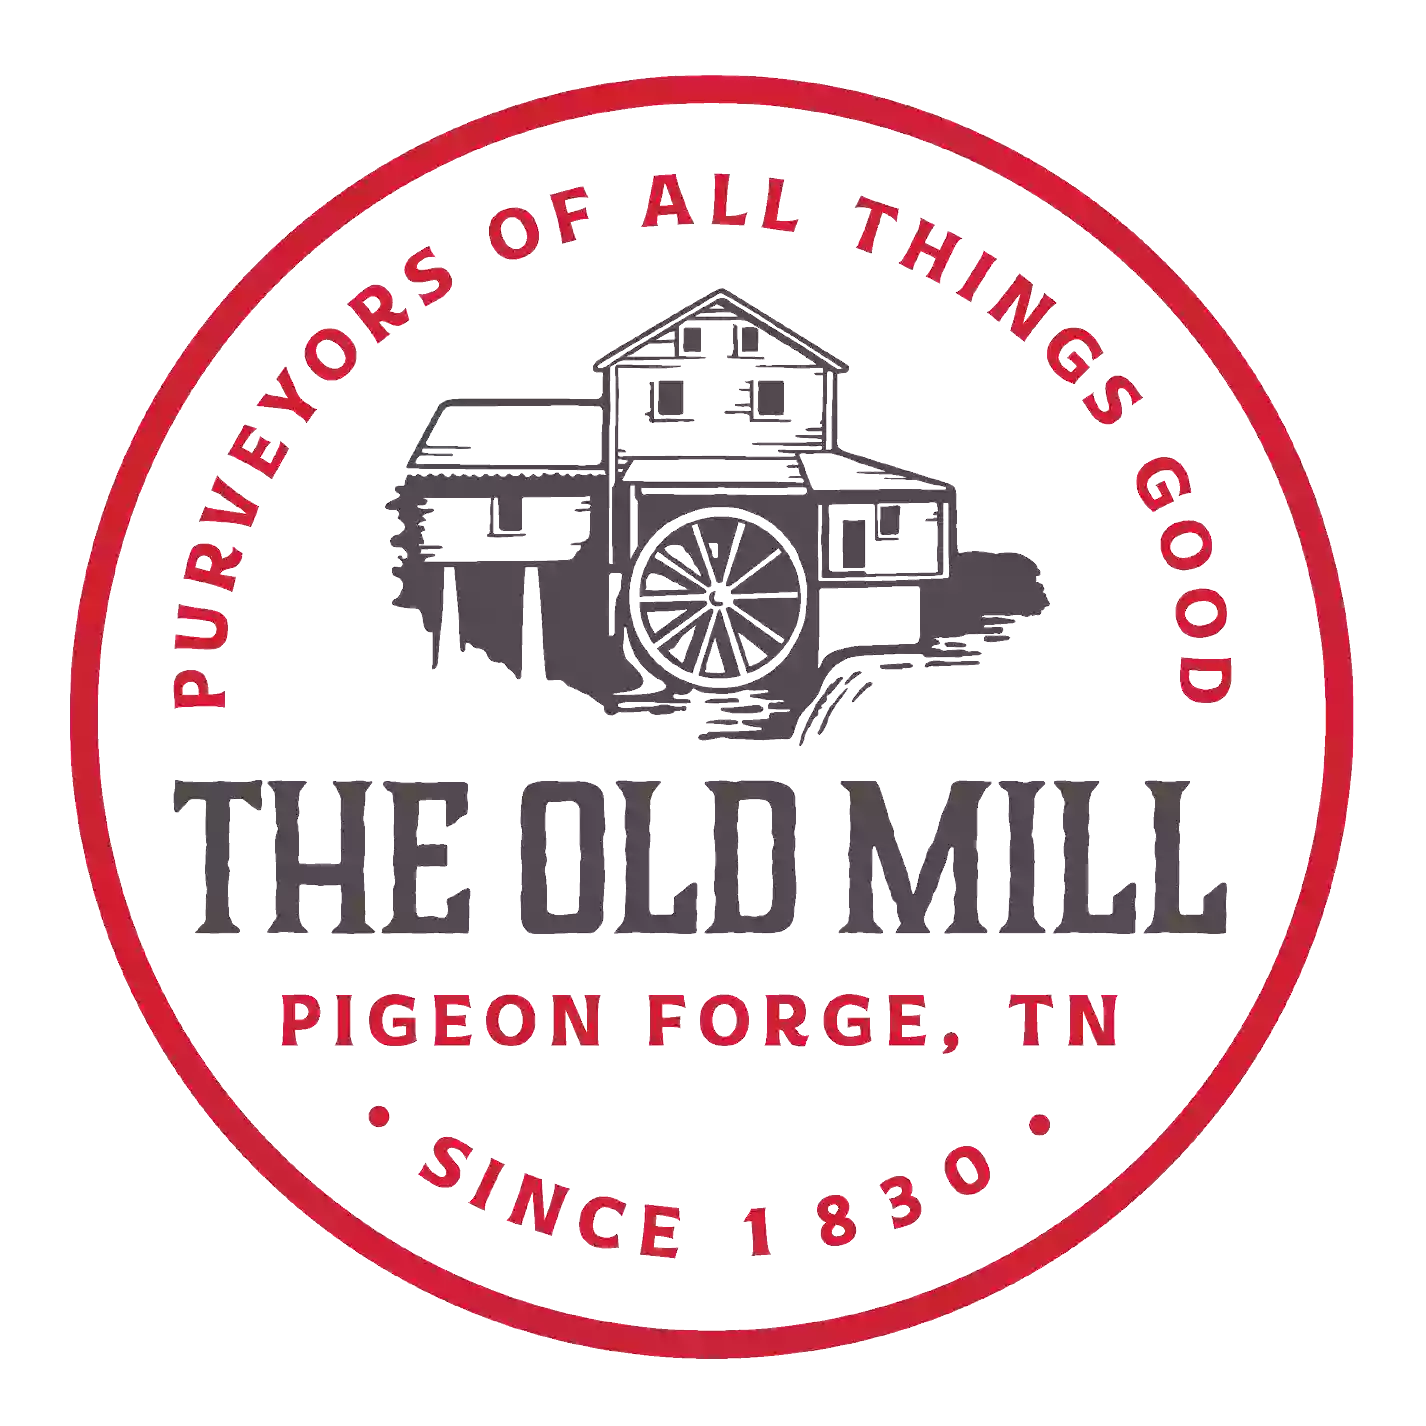 Old mill shops